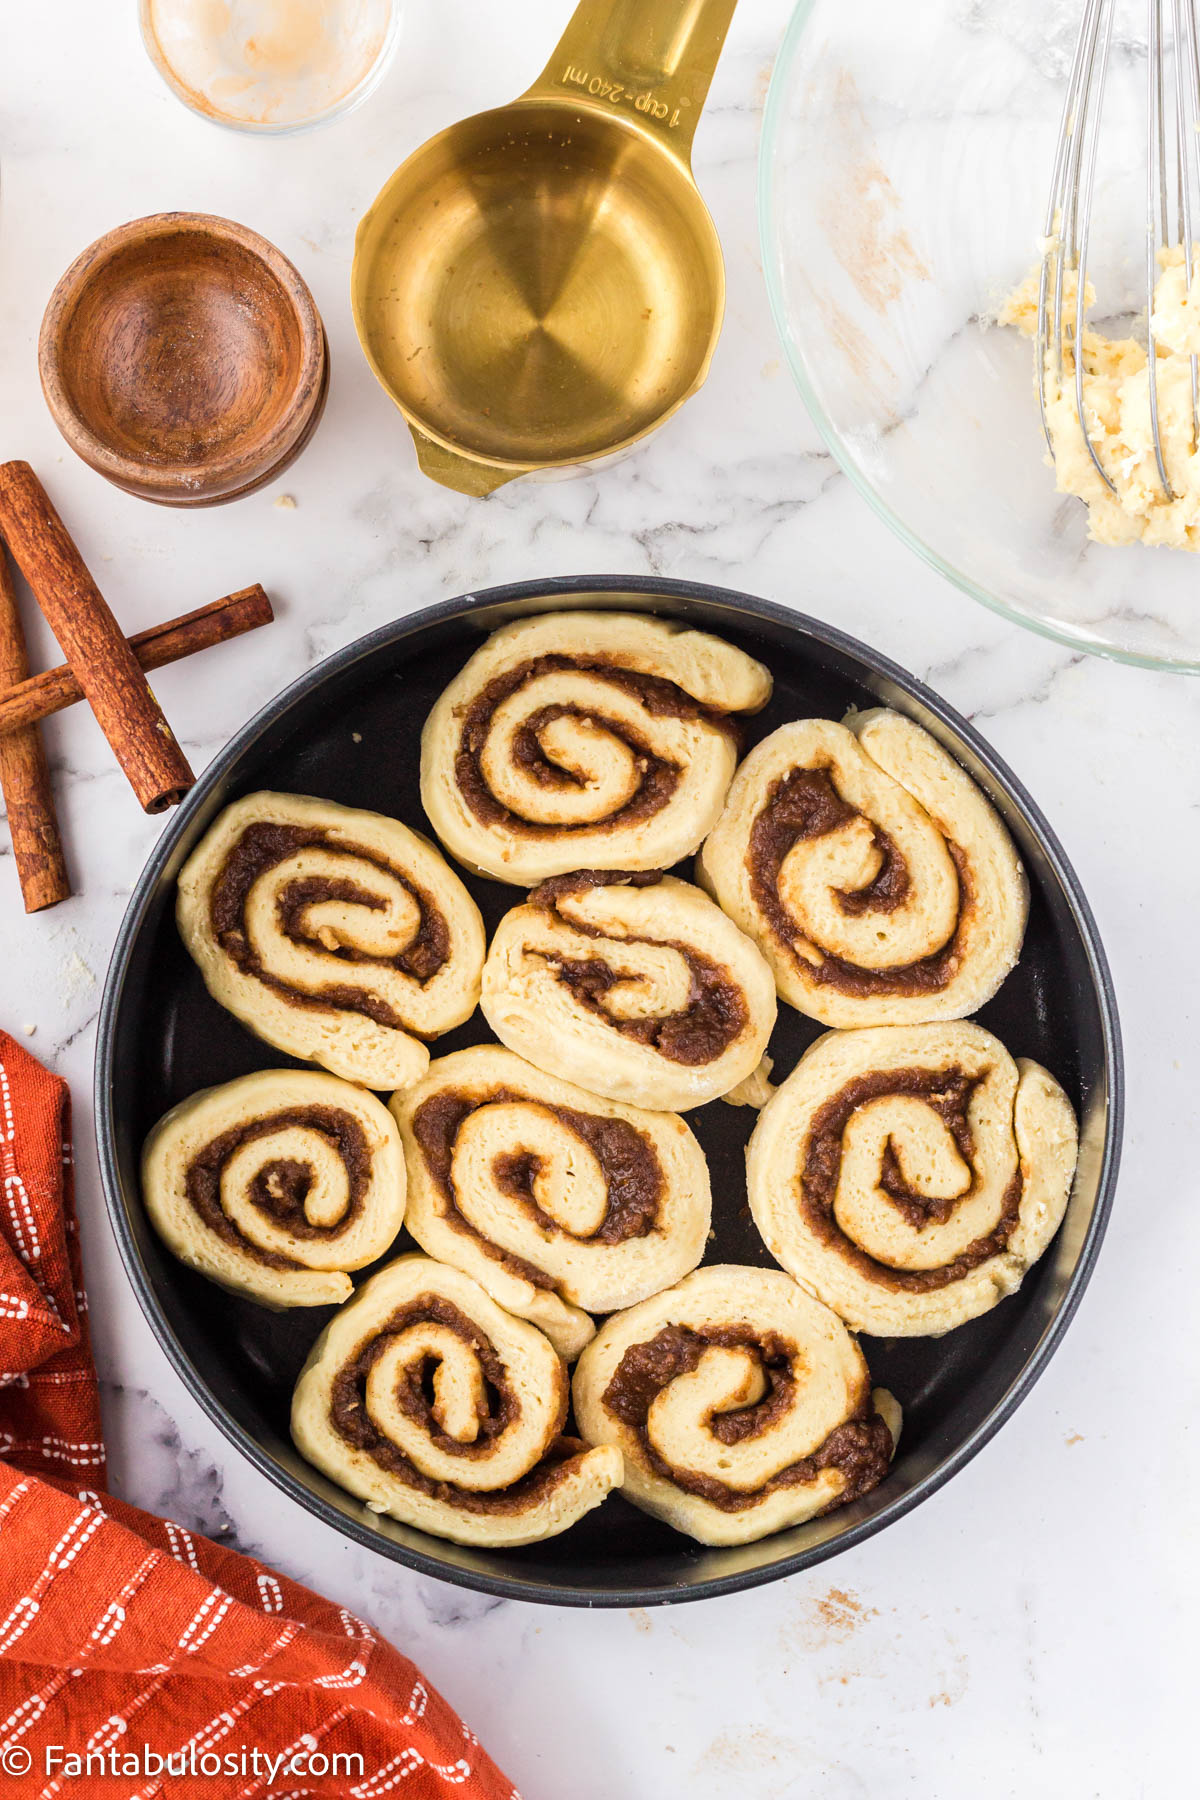 Roll cinnamon rolls in to tube shape and slice